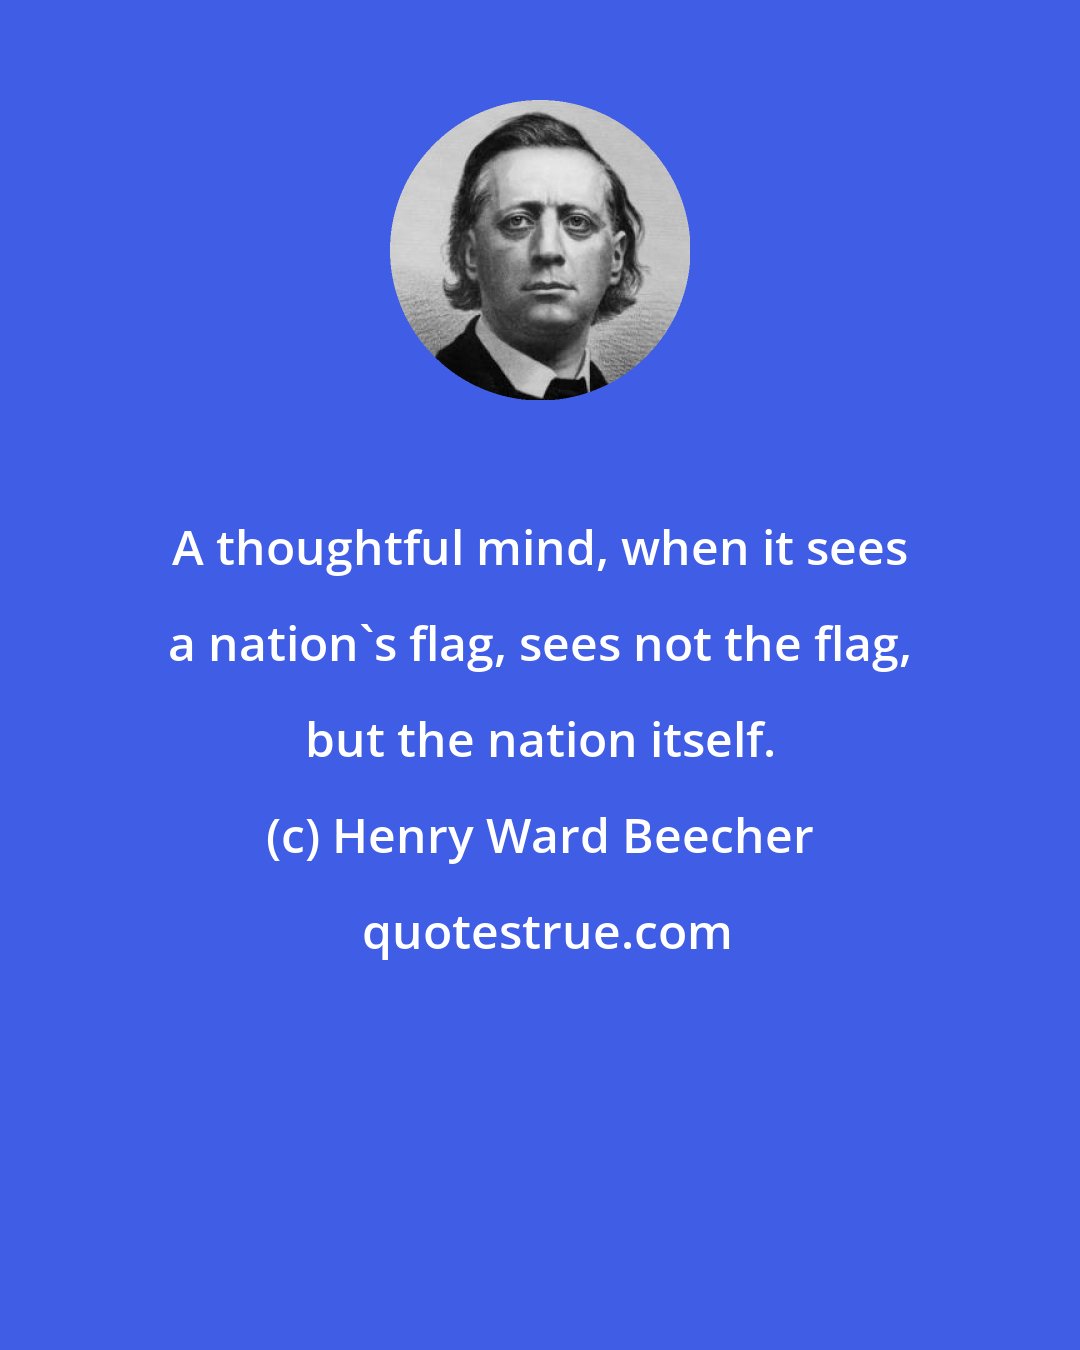 Henry Ward Beecher: A thoughtful mind, when it sees a nation's flag, sees not the flag, but the nation itself.